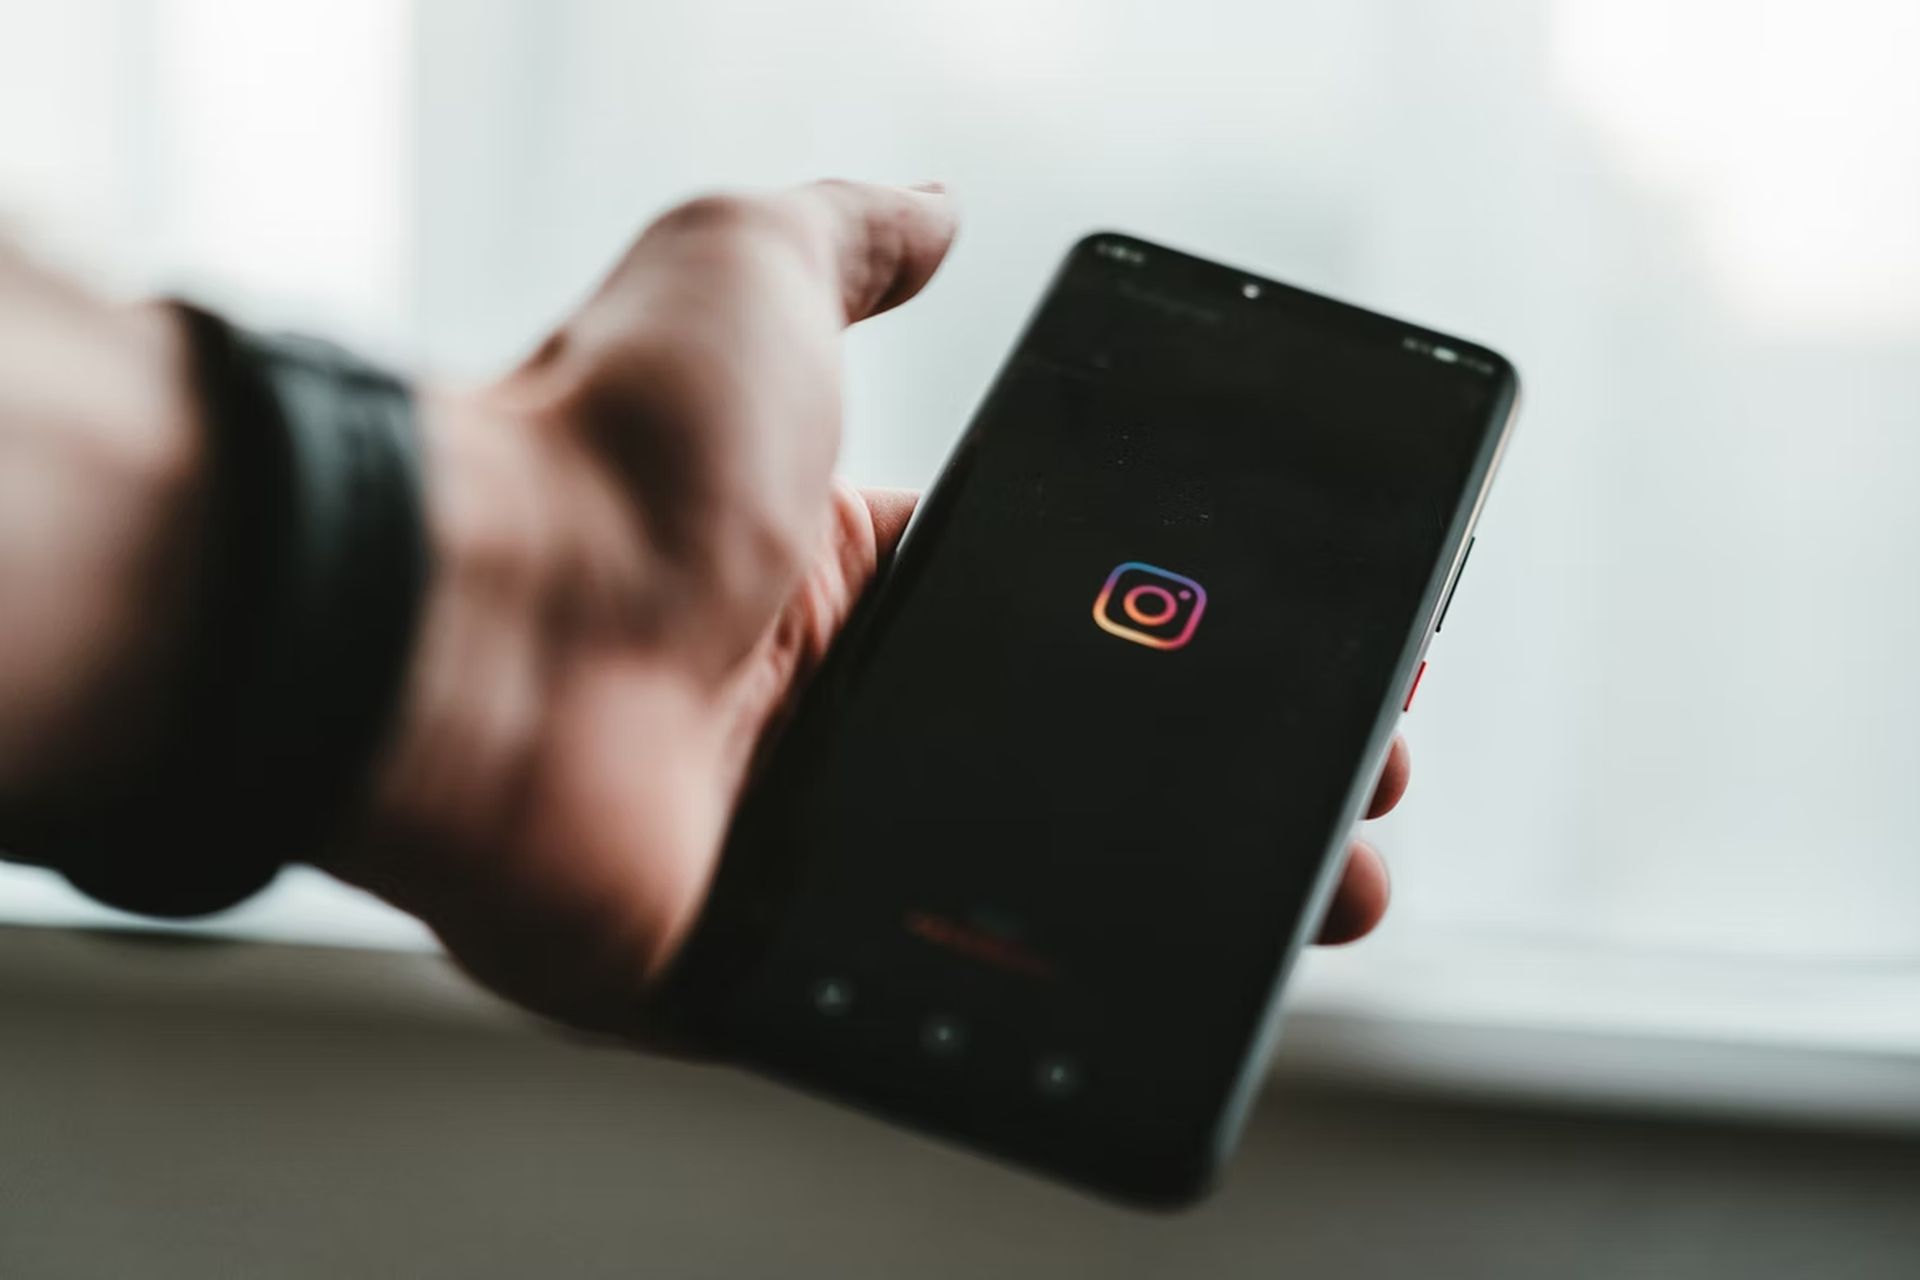 If your Instagram DMs are not working in 2022, here we explain why Instagram DMs are not working and how to fix Instagram DM error.